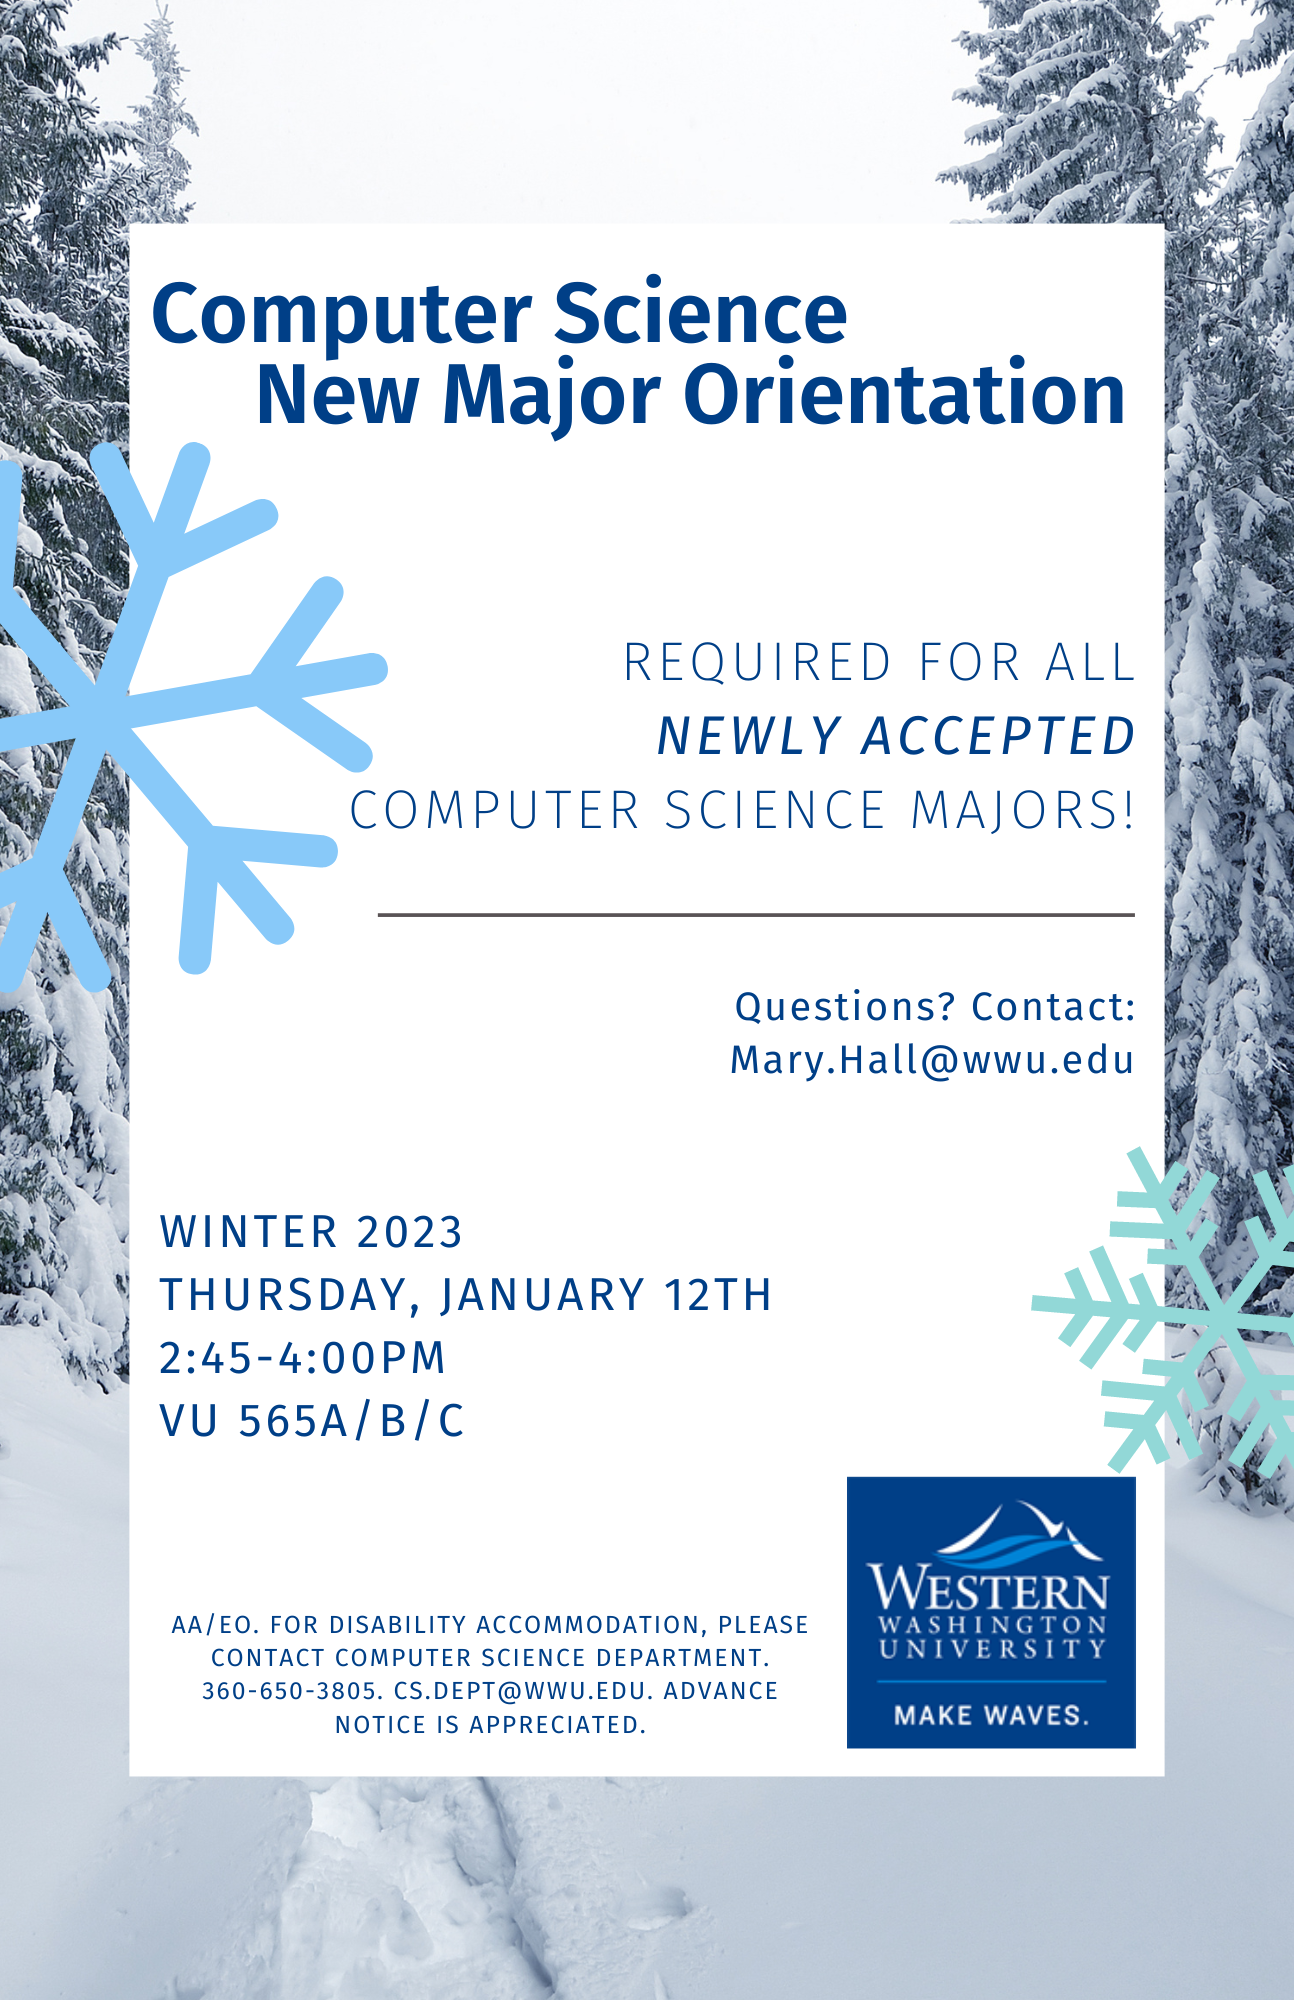 Computer Science New Major Orientation. Required for All Newly Accepted CS Majors. Thursday, January 12th, 2:45-3:00 PM in VU 565 A/B/C